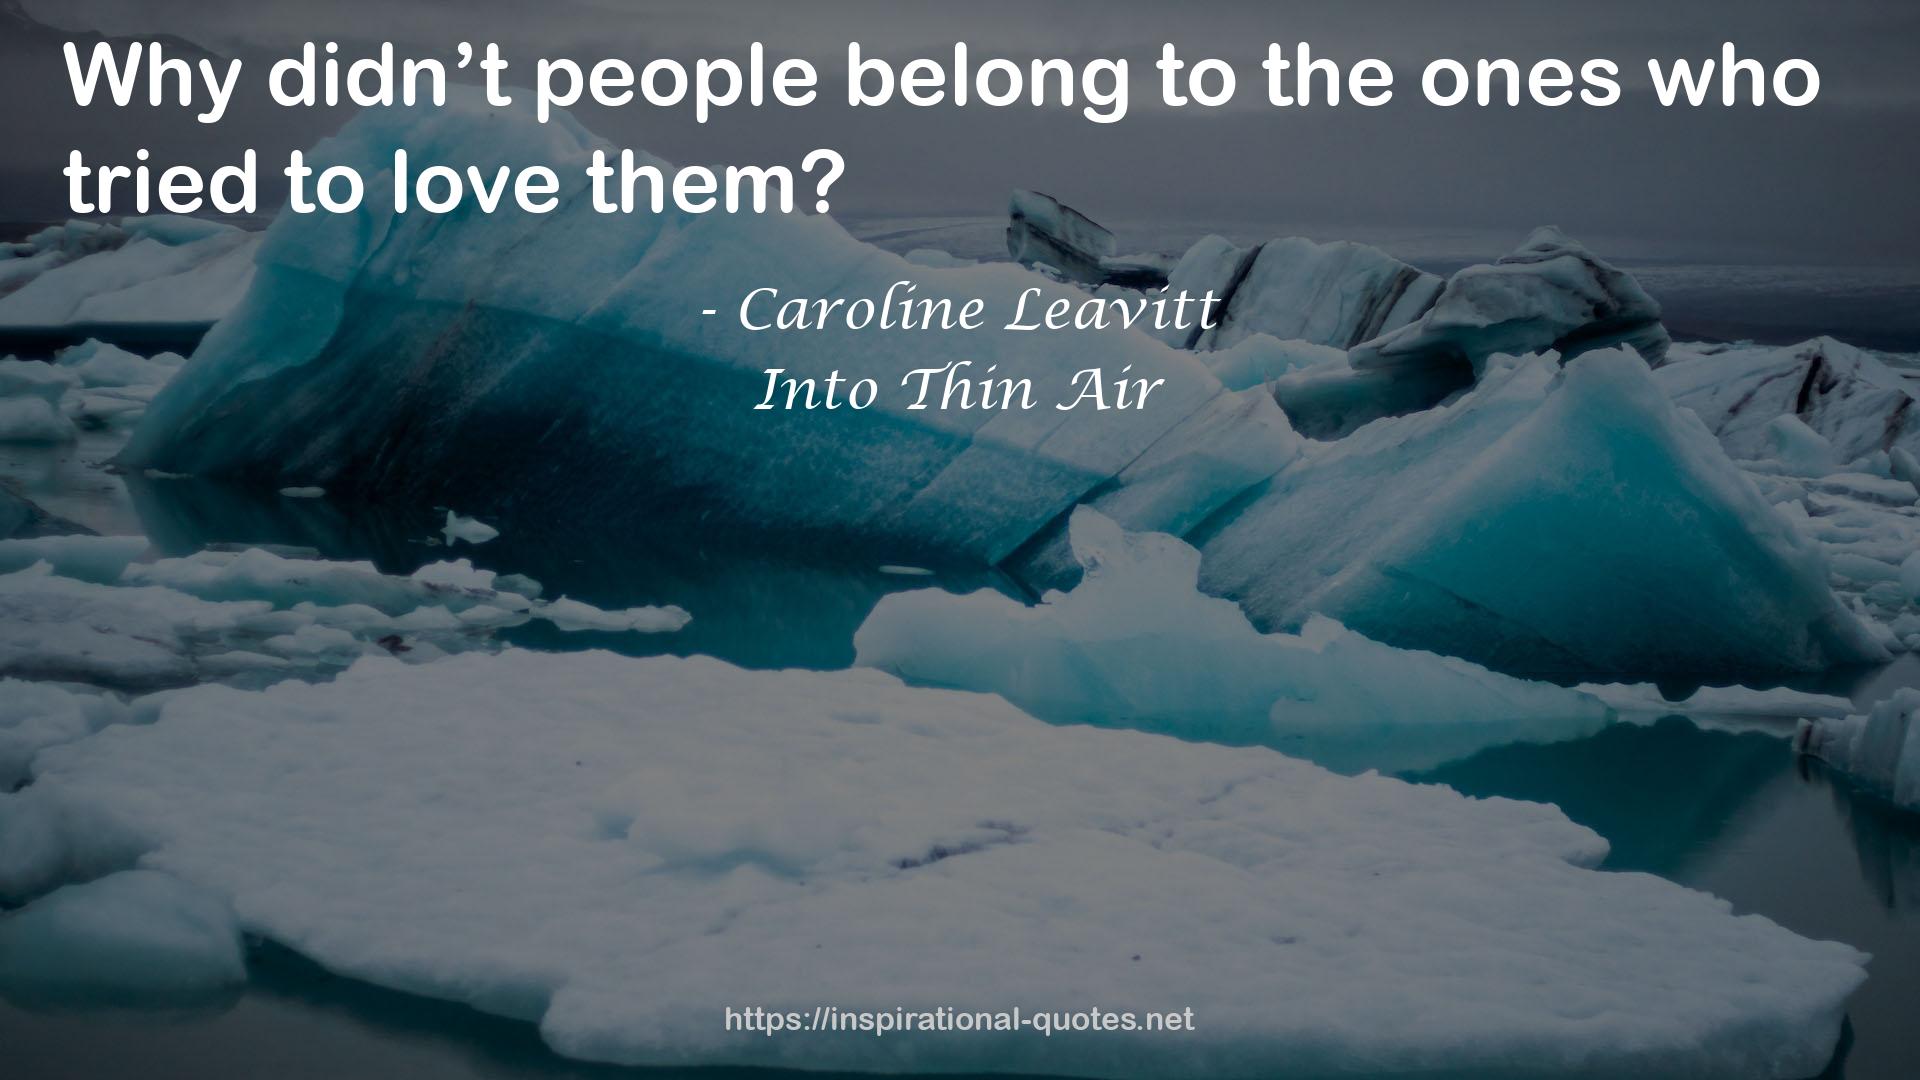 Into Thin Air QUOTES